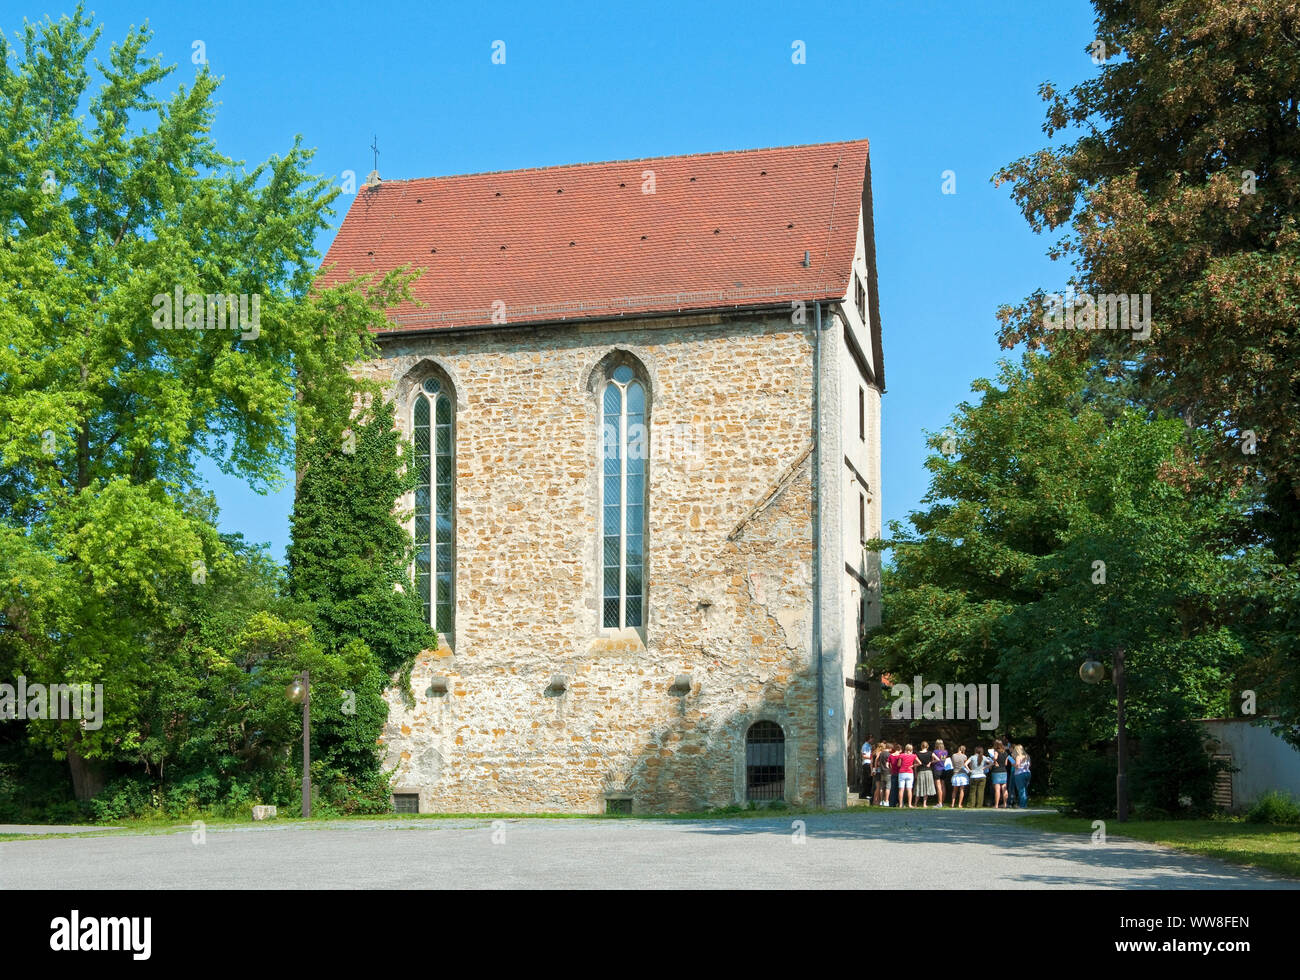 Germany, Baden-WÃ¼rttemberg, Pfullingen, monastery church of the former convent of Poor Clares St. CÃ¤cilien, founded 1250, early Gothic single nave quarry stone building, tracery windows Stock Photo